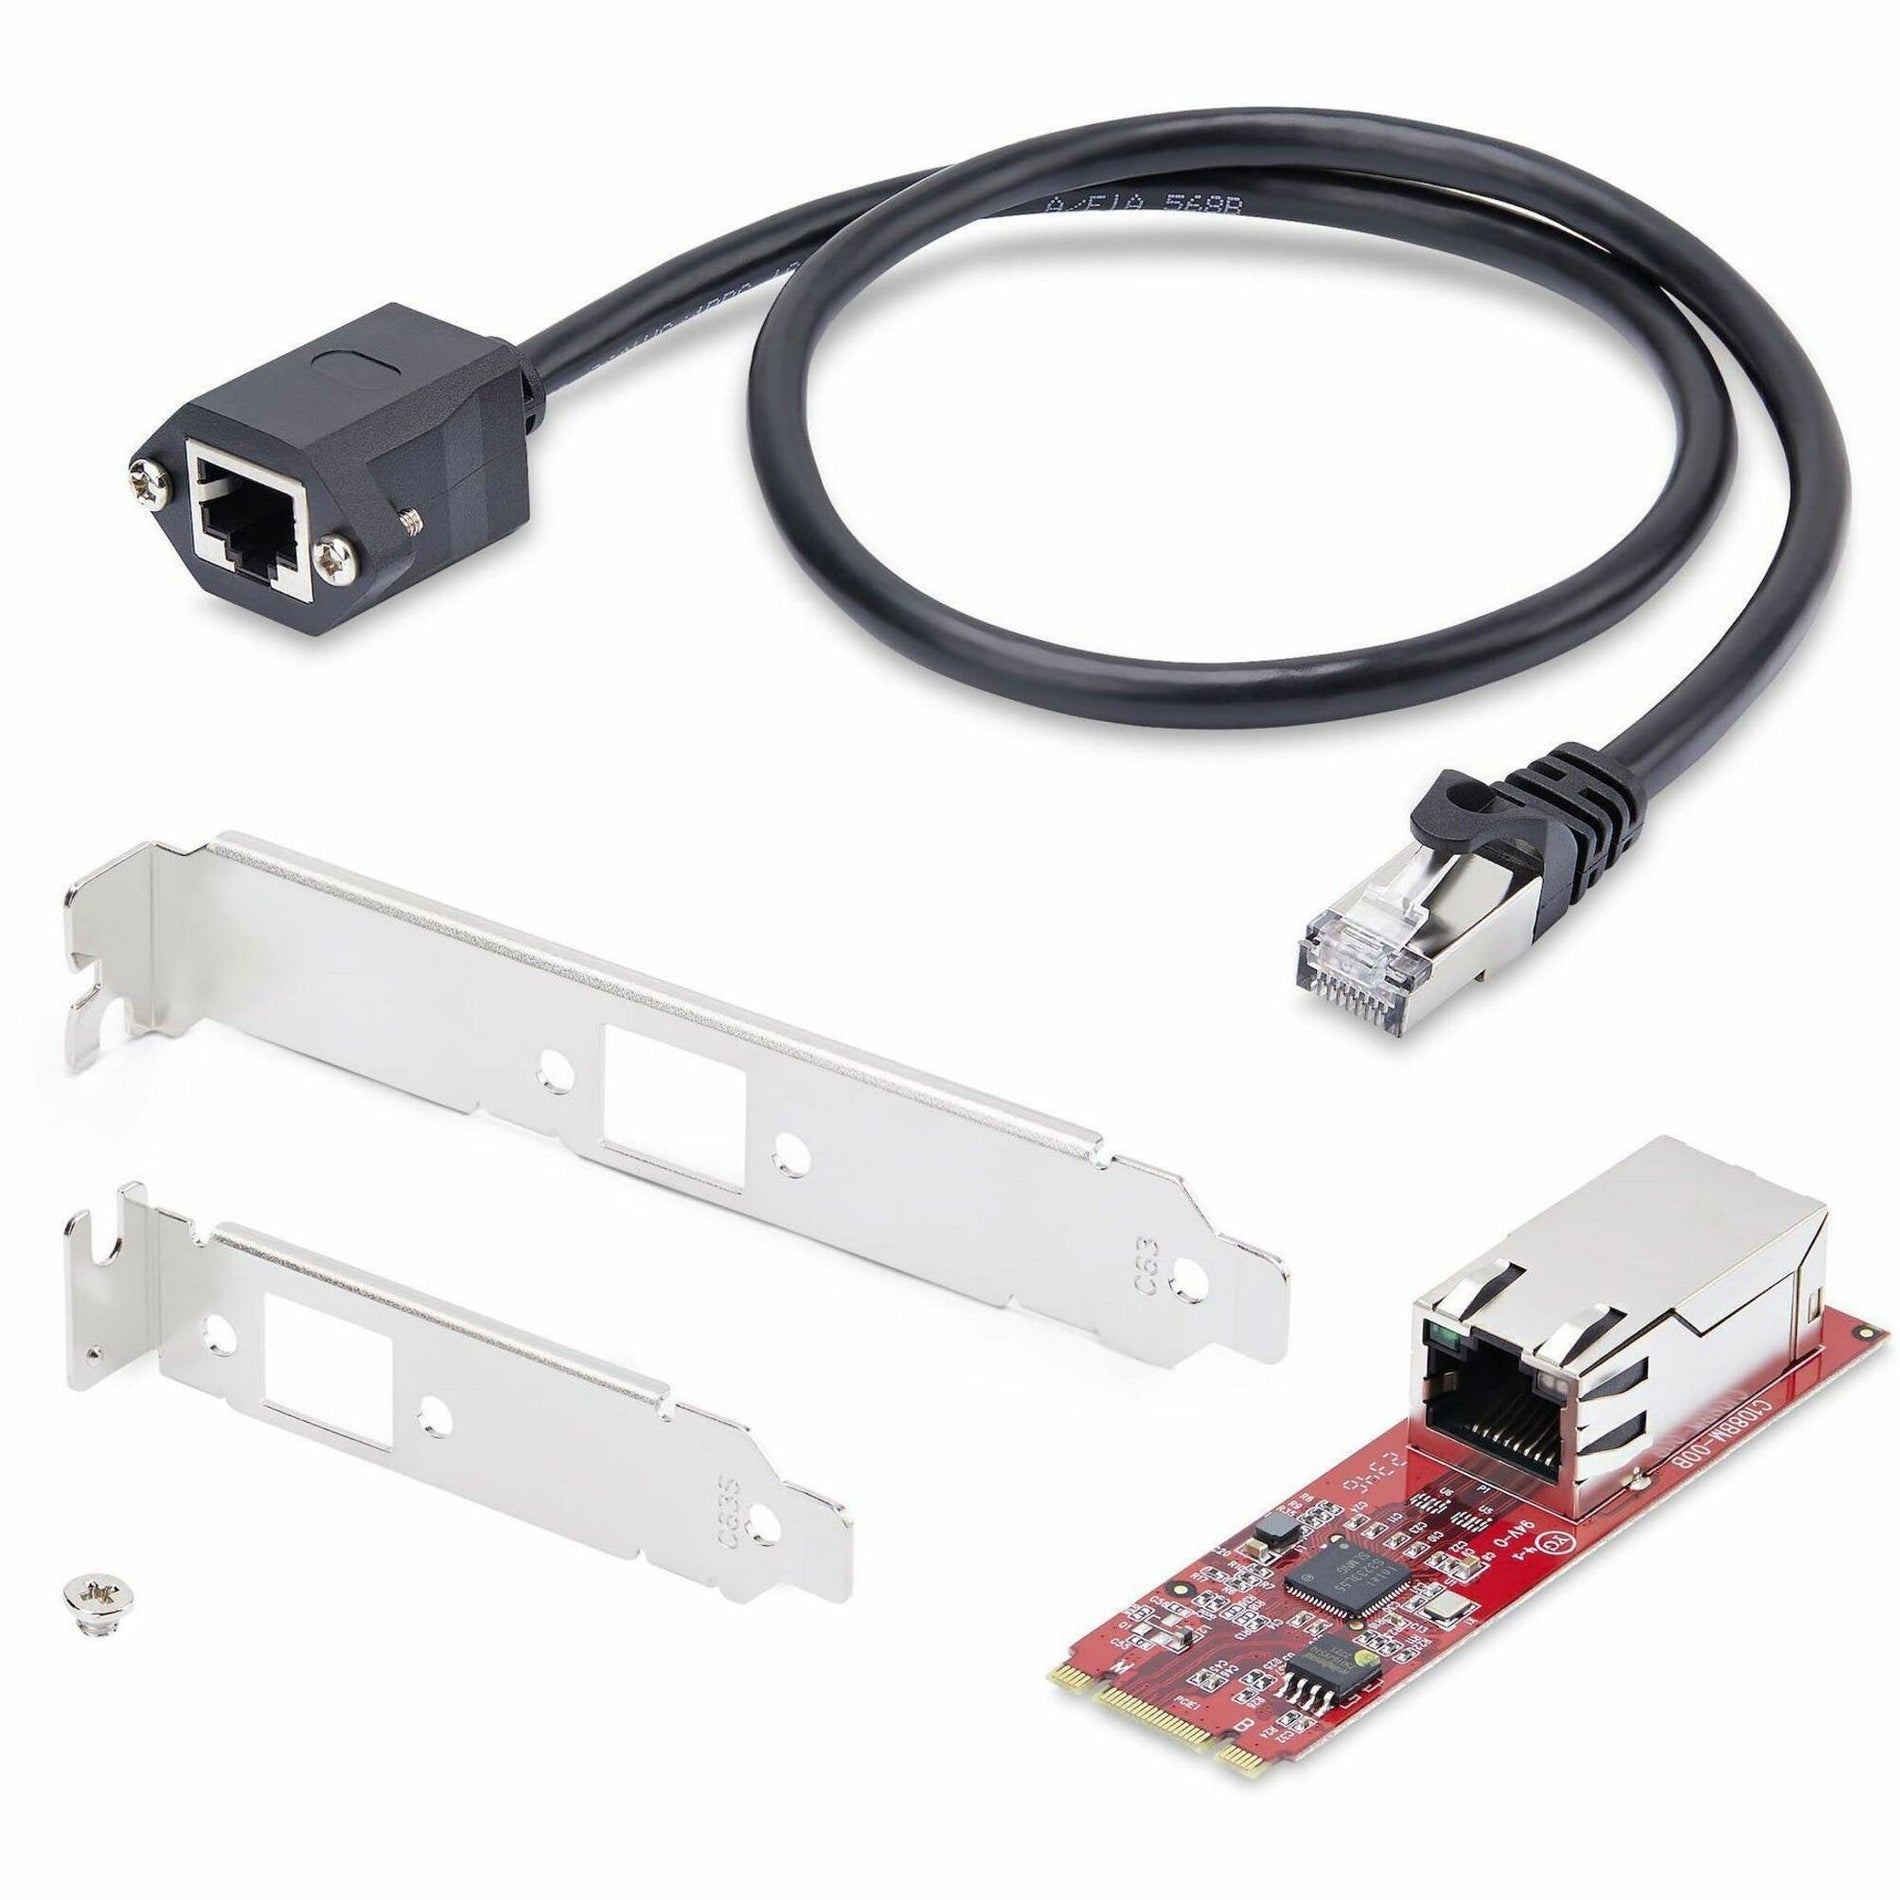 StarTech.com (MR12GINETWORKCARD) Network Interface Cards (MR12GI-NETWORK-CARD)